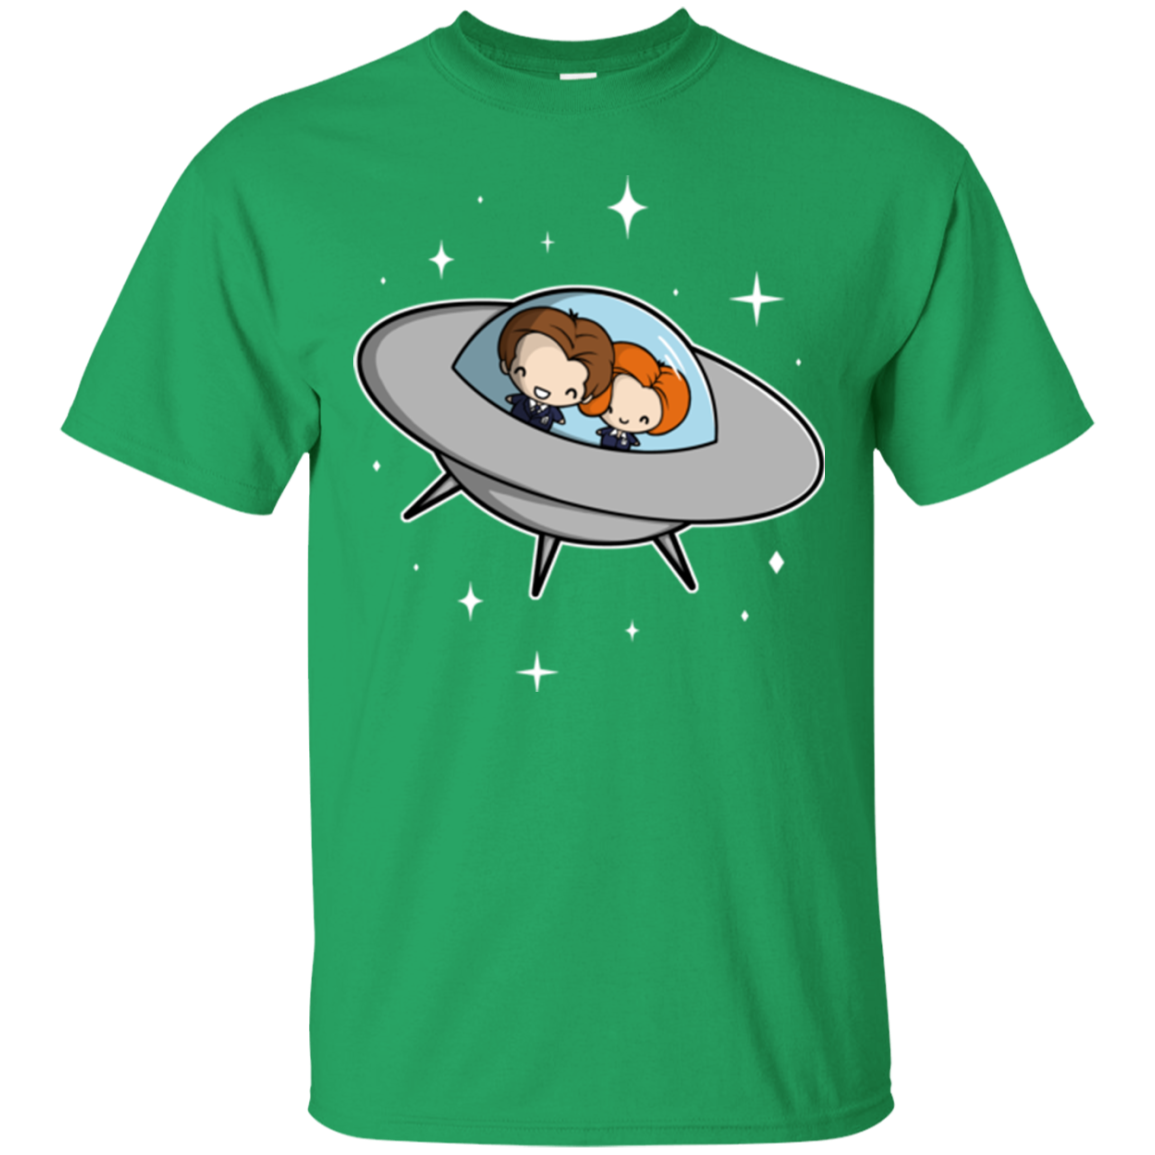 Agents in Space T-Shirt